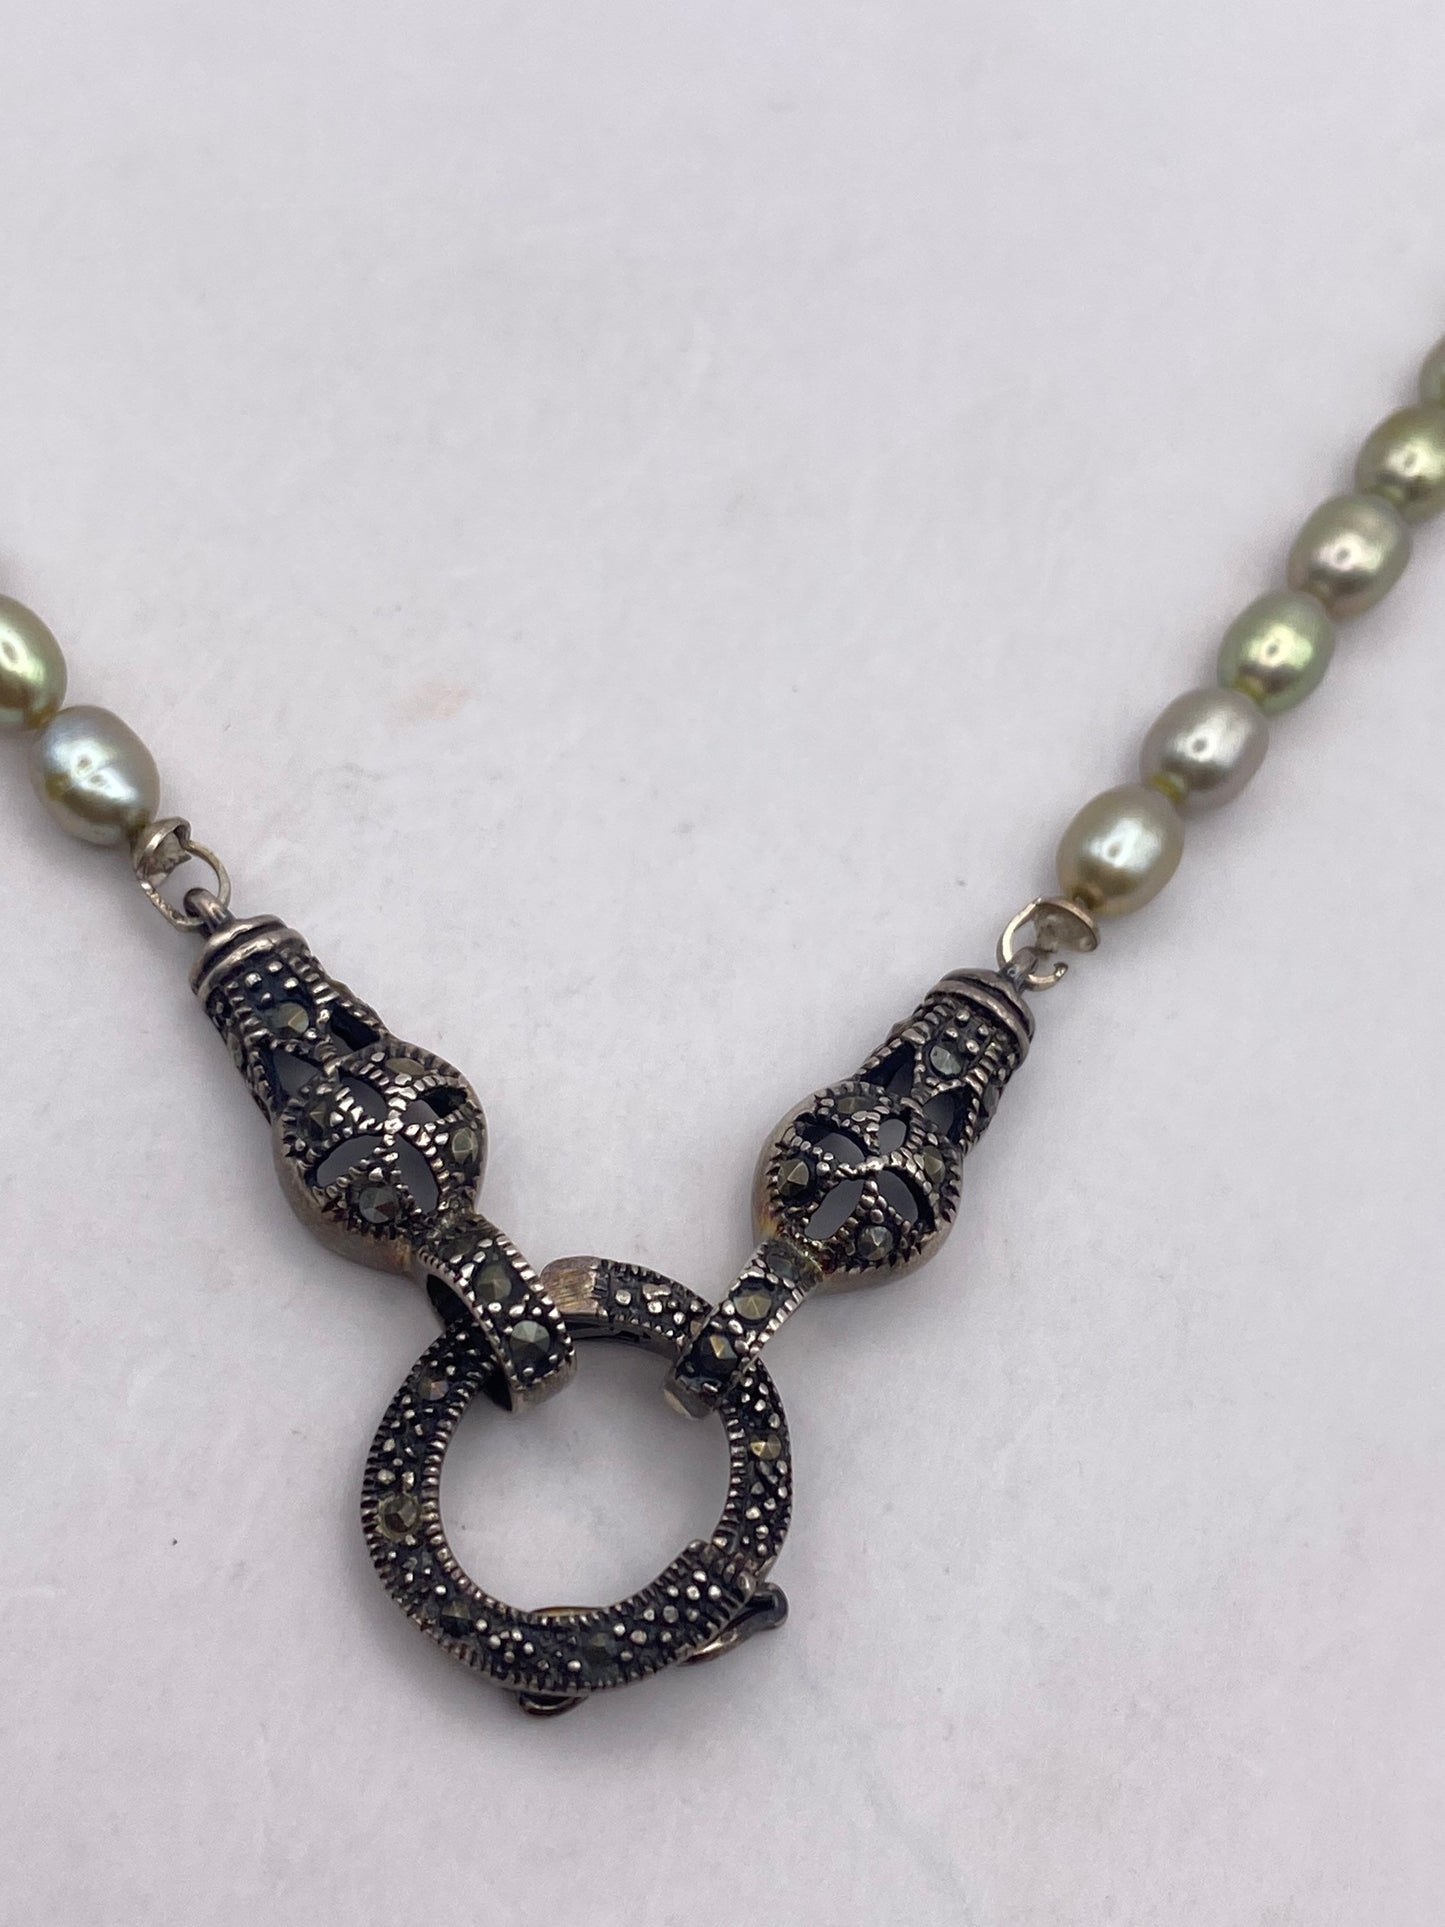 Vintage Real Marcasite and Genuine Pearl 925 Sterling Silver Toggle Pendant Necklace